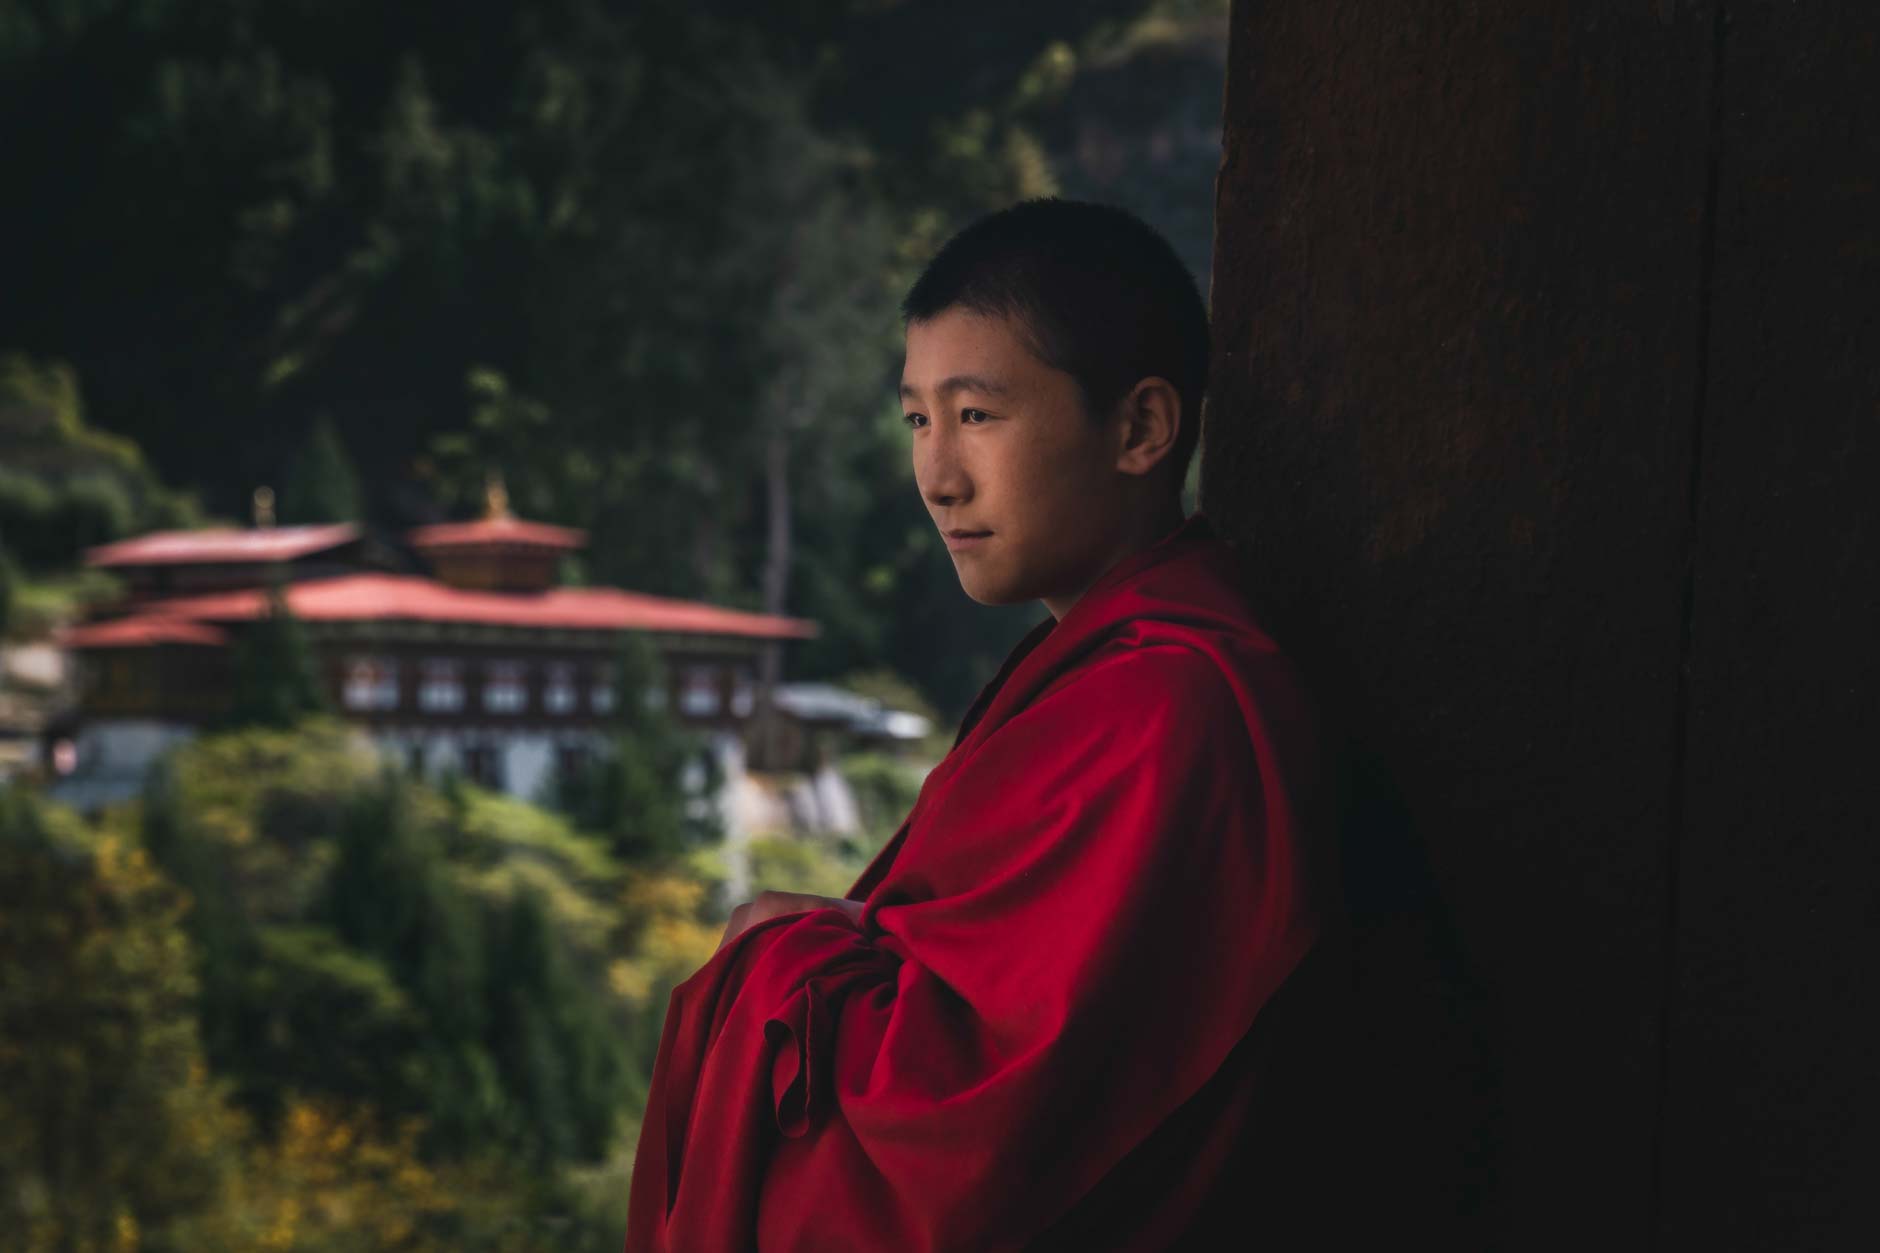 Portrait photography of a young Bhutanese monk wearing red robes in Paro Dzong